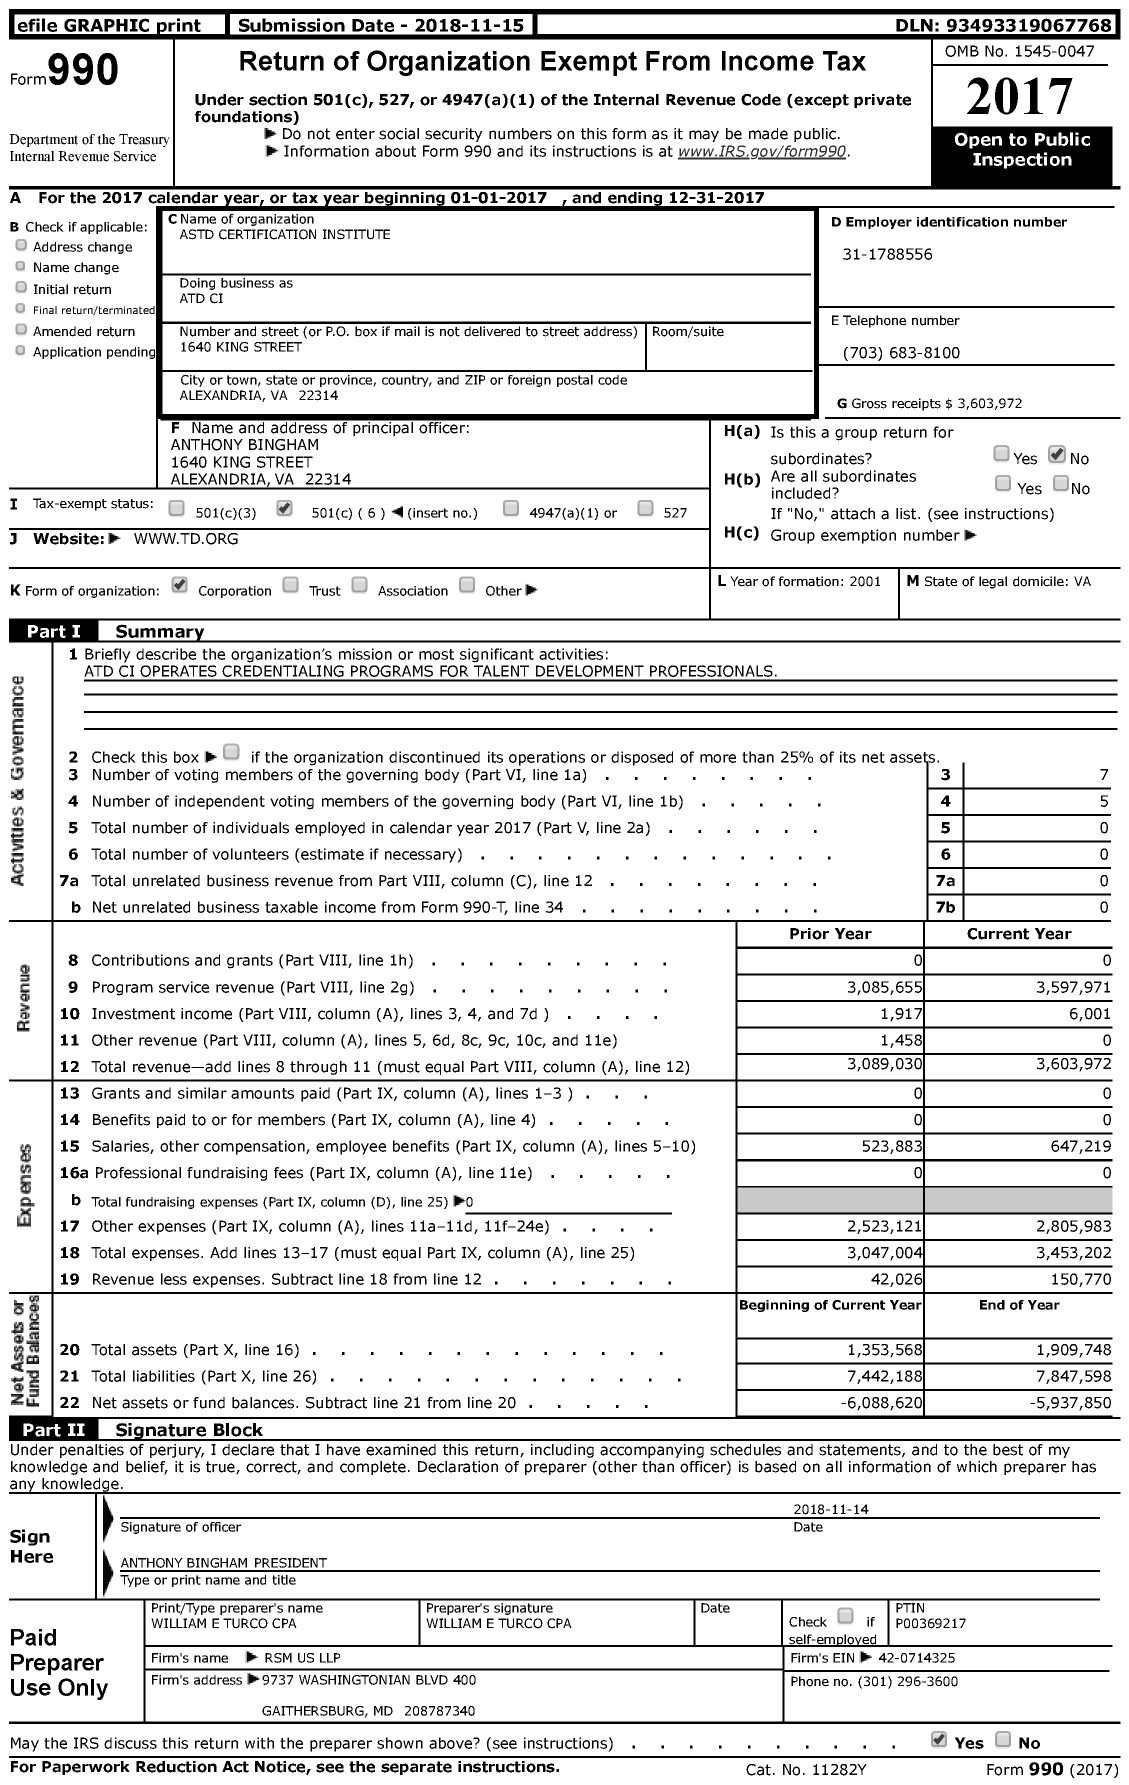 Image of first page of 2017 Form 990 for Atd Ci (ATD)